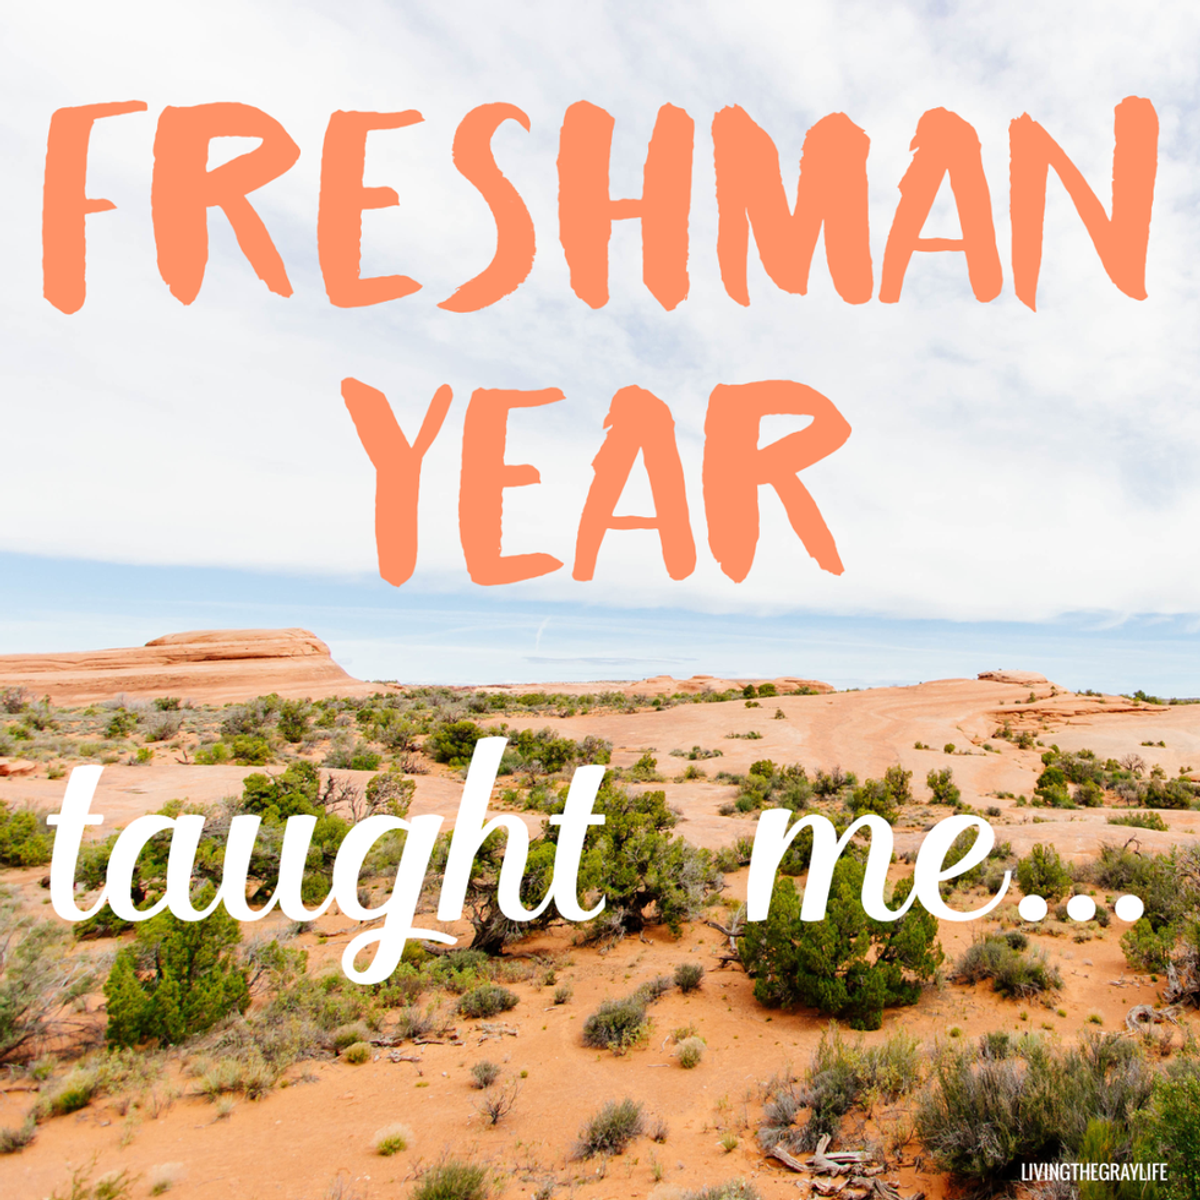 What Will Your Freshman Year Of College Teach You?